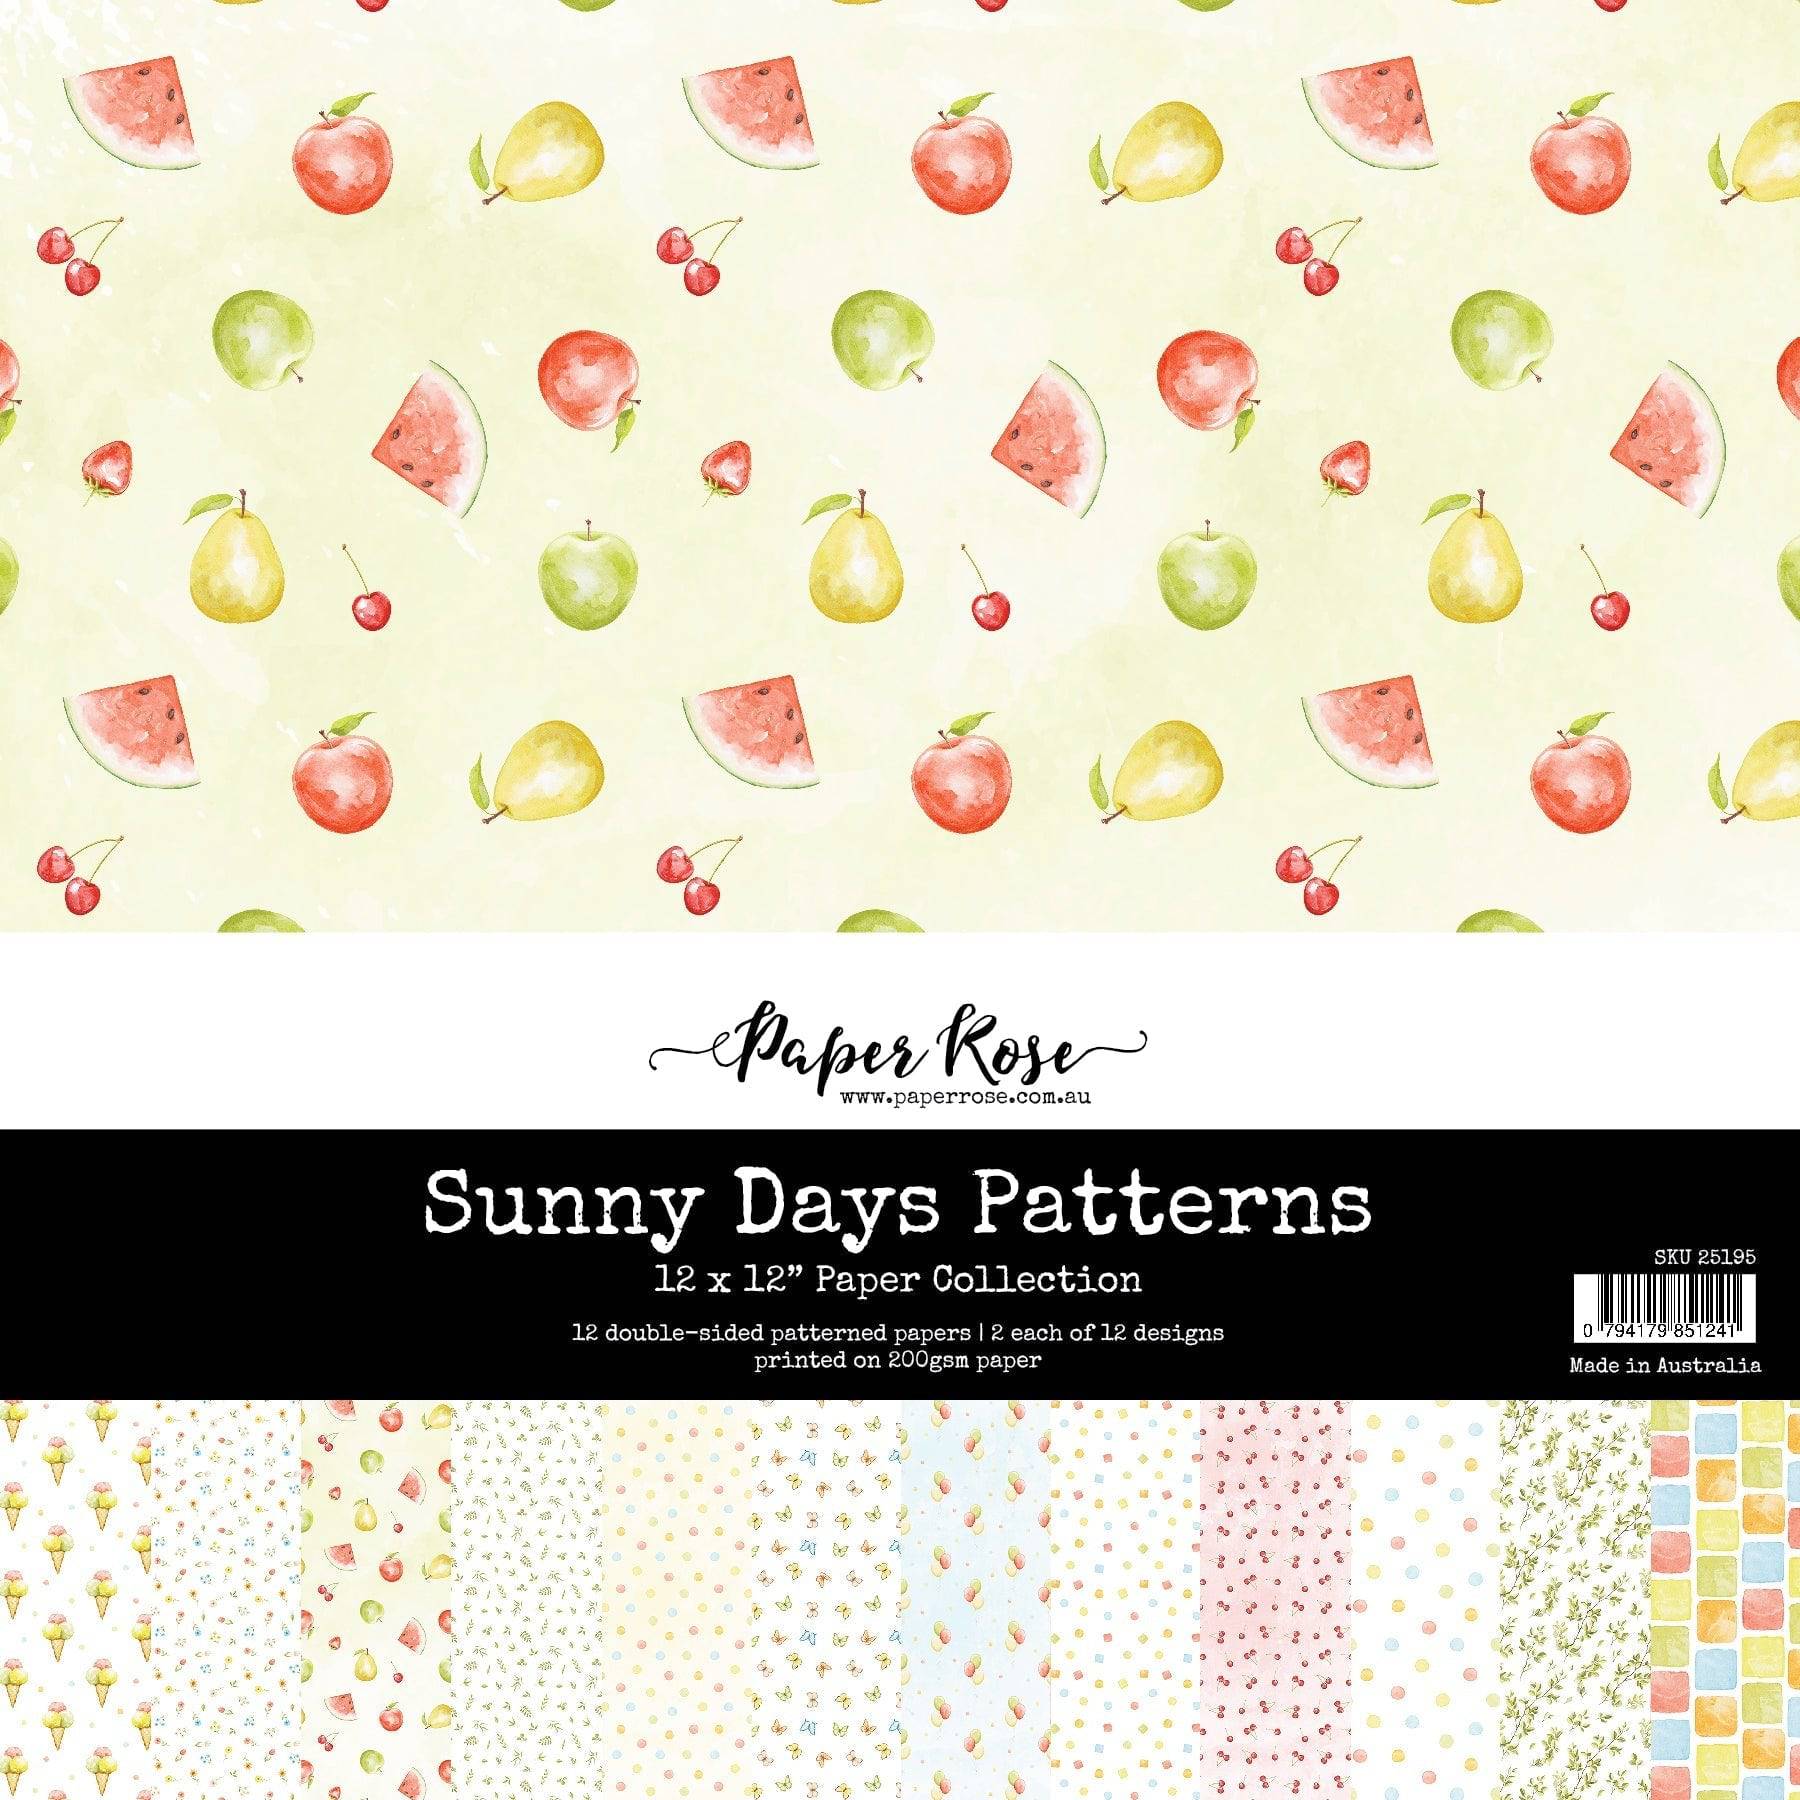 Sunny Days Patterns 12x12 Paper Collection 25195 Paper Rose Studio